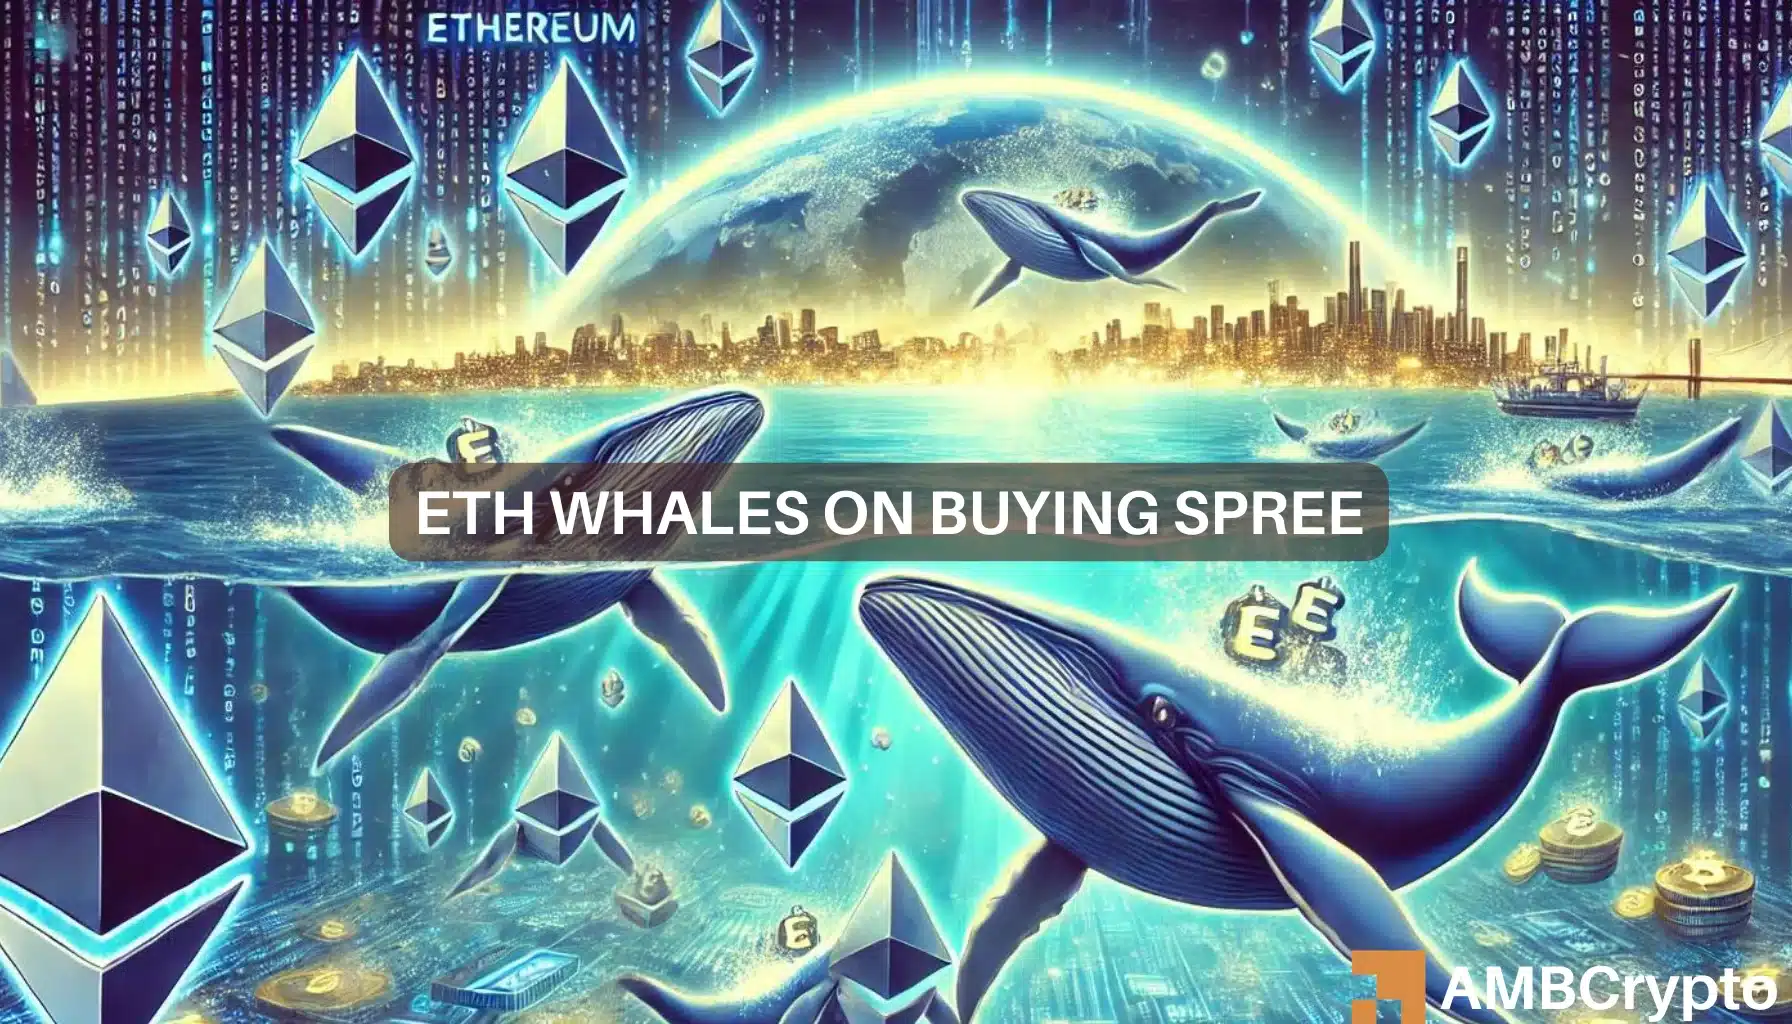 Ethereum whales buy ETH worth $440 mln - Preparing for a rally?